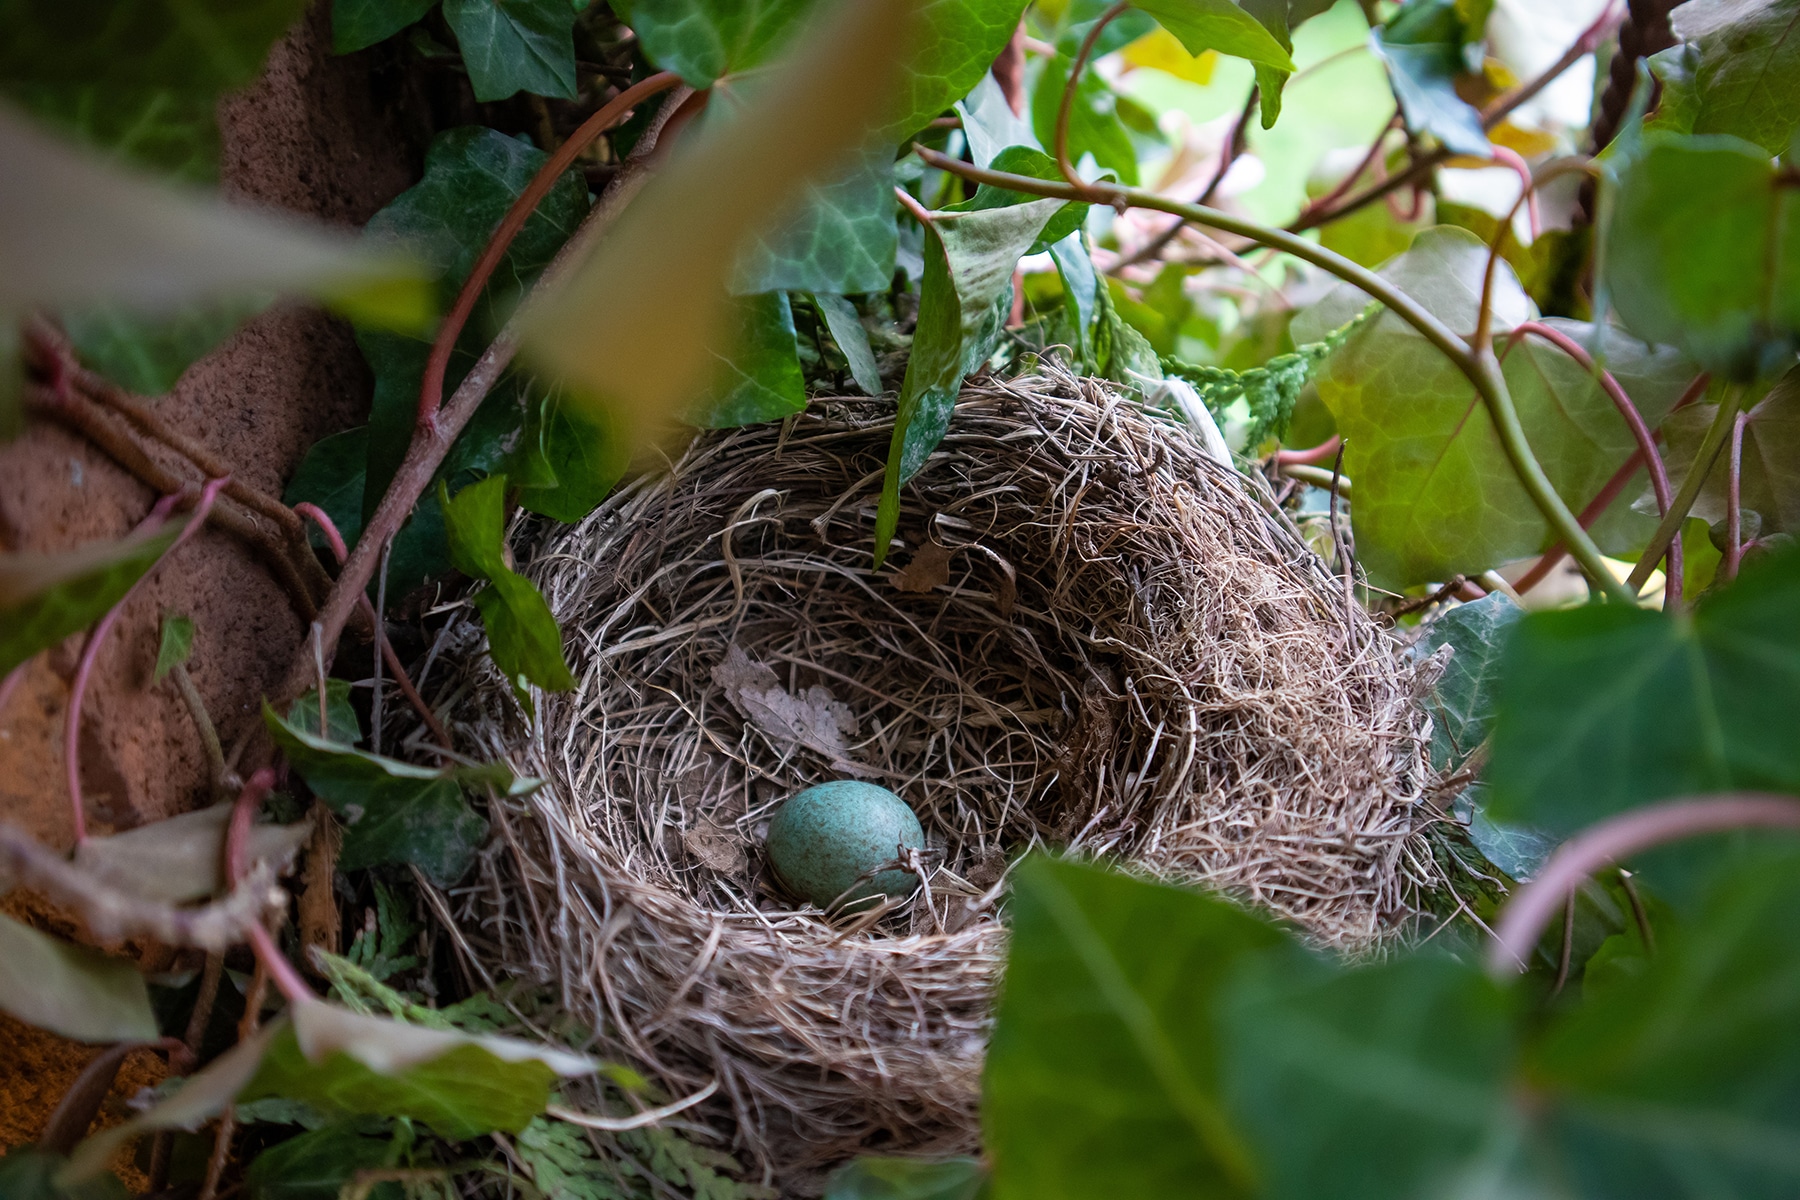 Pictures Of Bird Nests Sharon Beals Images Of Bird Nests From Around